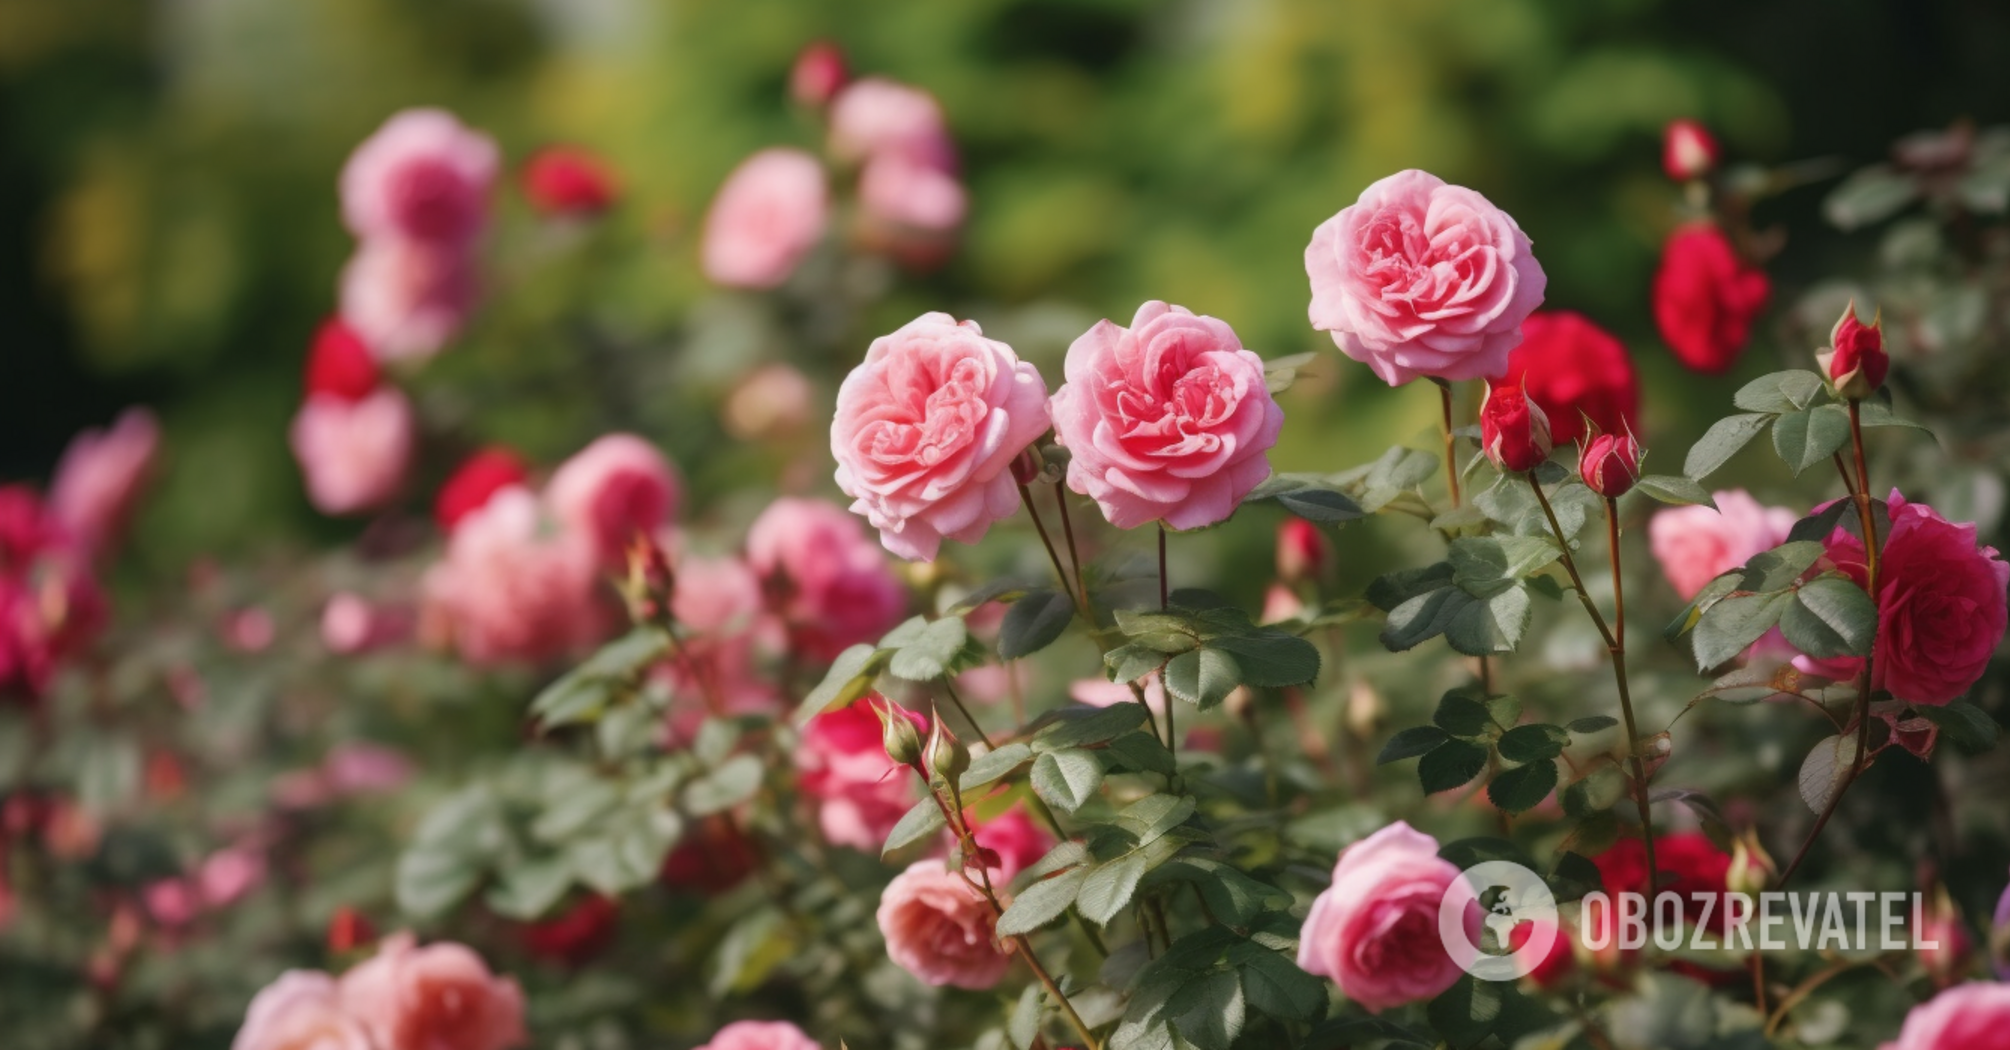 What diseases can ruin roses and how to save the plant